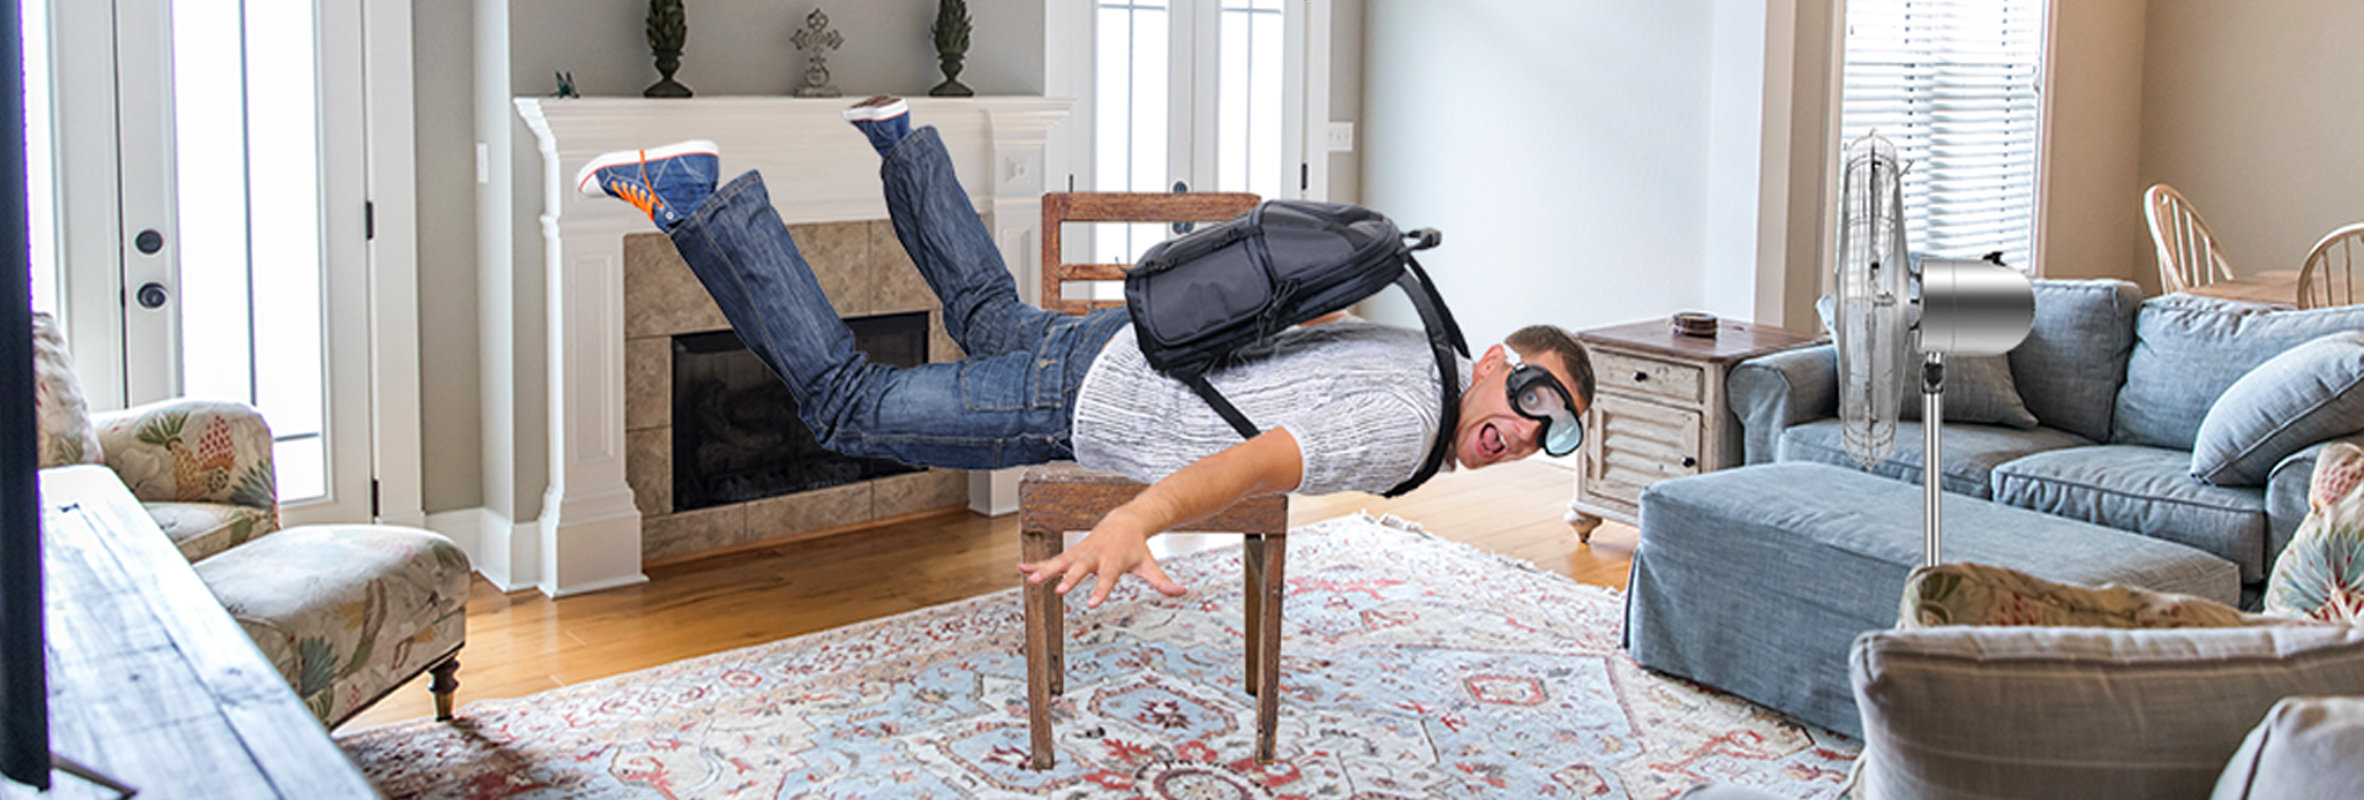 A yound man floating in the air in a cozy living room wearing a backpack and black goggles with a surprised expression on his face as if he did not expect to defy gravity.